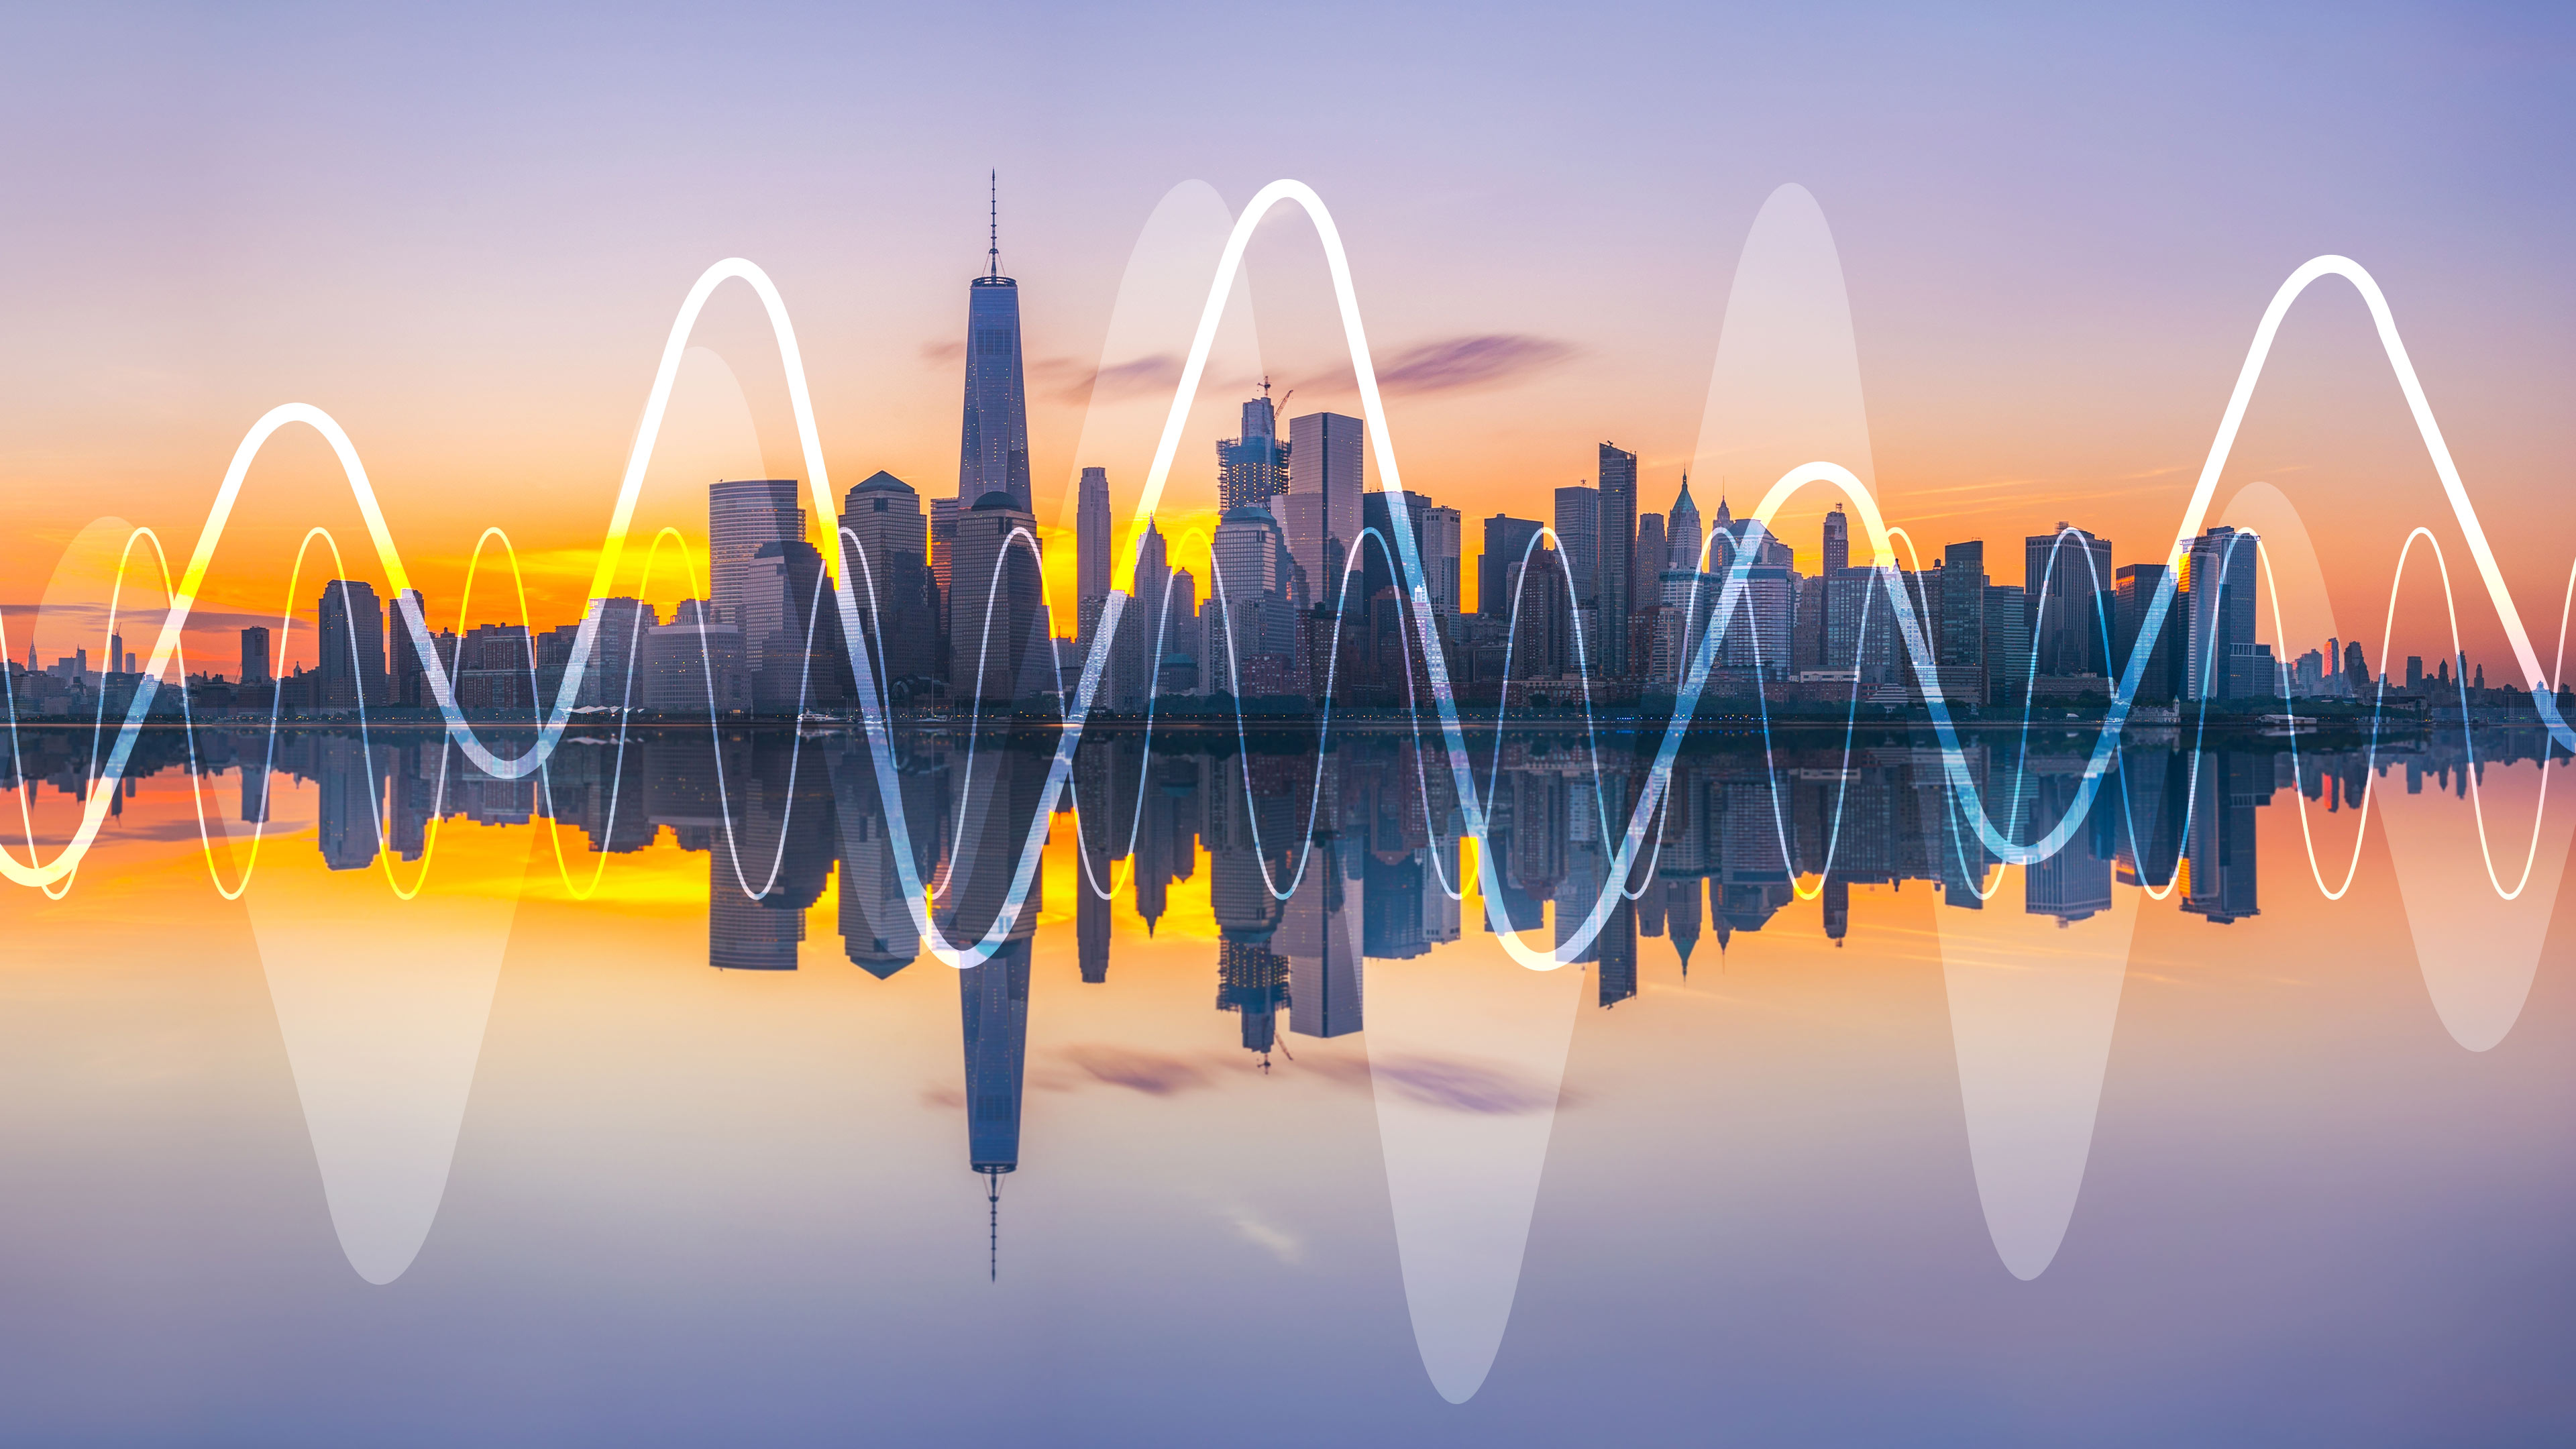 Illustration of a noise wave over a city